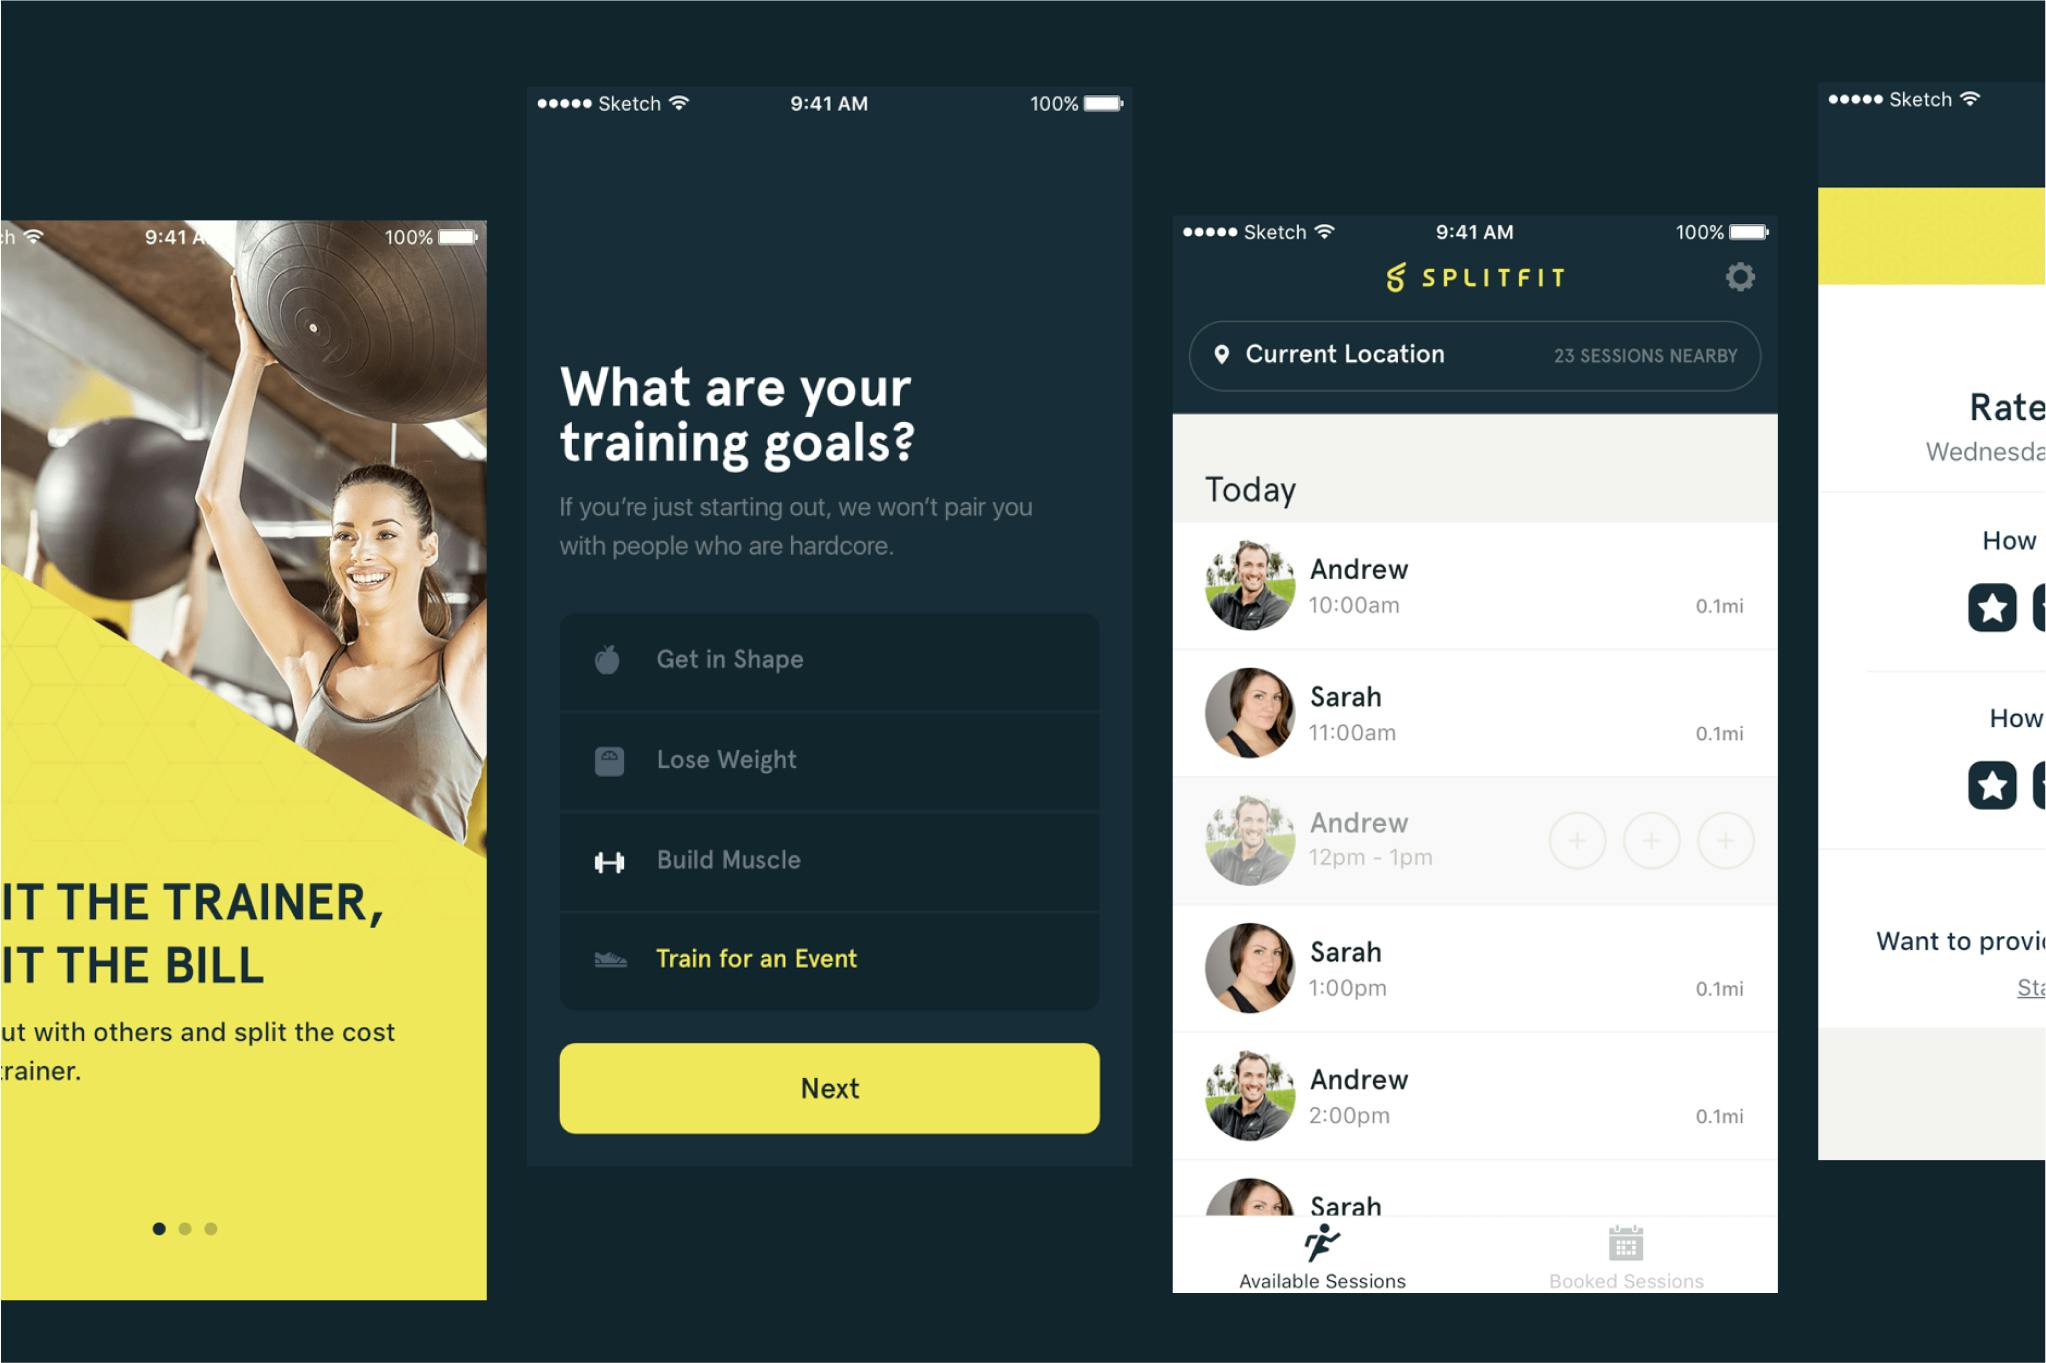 Screenshots of the SplitFit app, including onboarding, training goals, a list of trainers, and a workout rating.